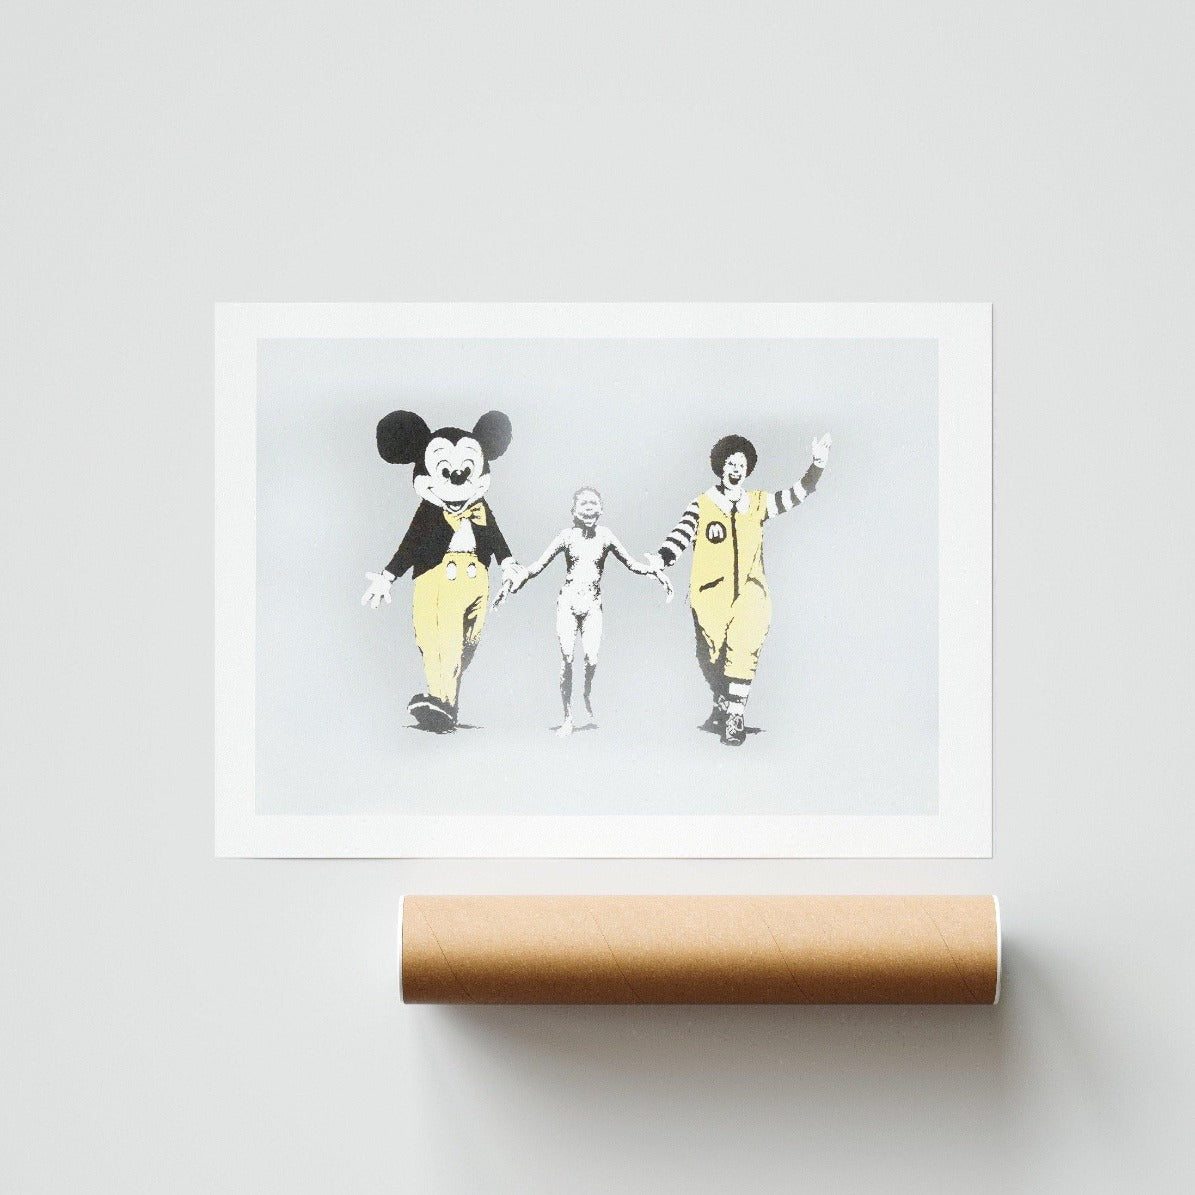 A Banksy for your walls. One of the most iconic street artists of our time, Banksy's art is the perfect way to add some edge to your walls. This print of Napalm Girl is a powerful reminder of the human cost of war. With its unique and edgy style, this print is a must-have for any Banksy fan. Hang it in your home or office and enjoy its striking artwork every day.- 98types